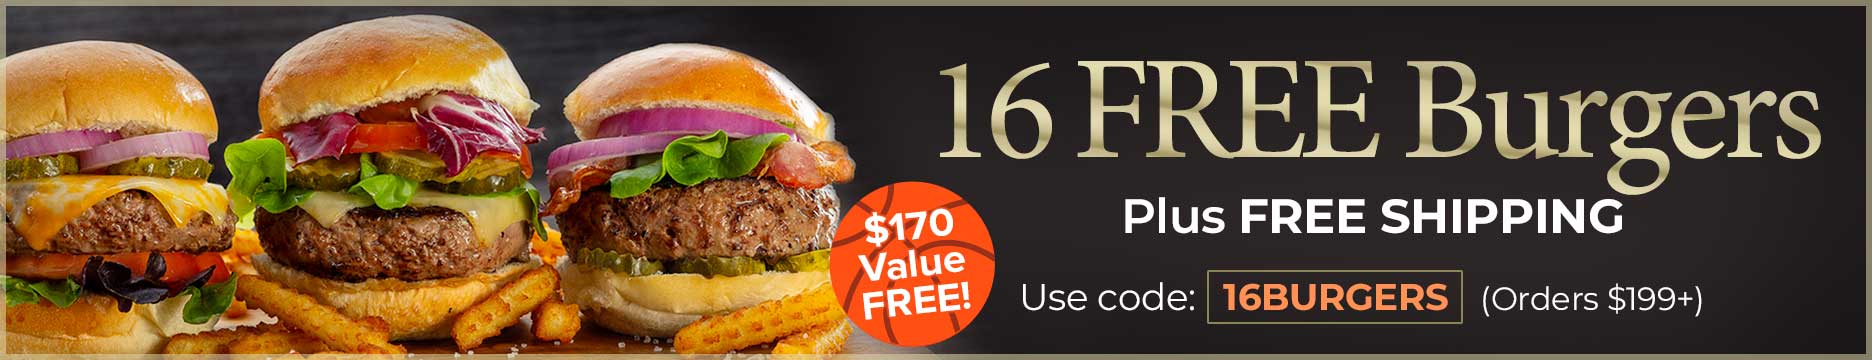 Receive 16 FREE Burger PLUS FREE shipping on any orders of $199. Use Promo Code 16BURGERS